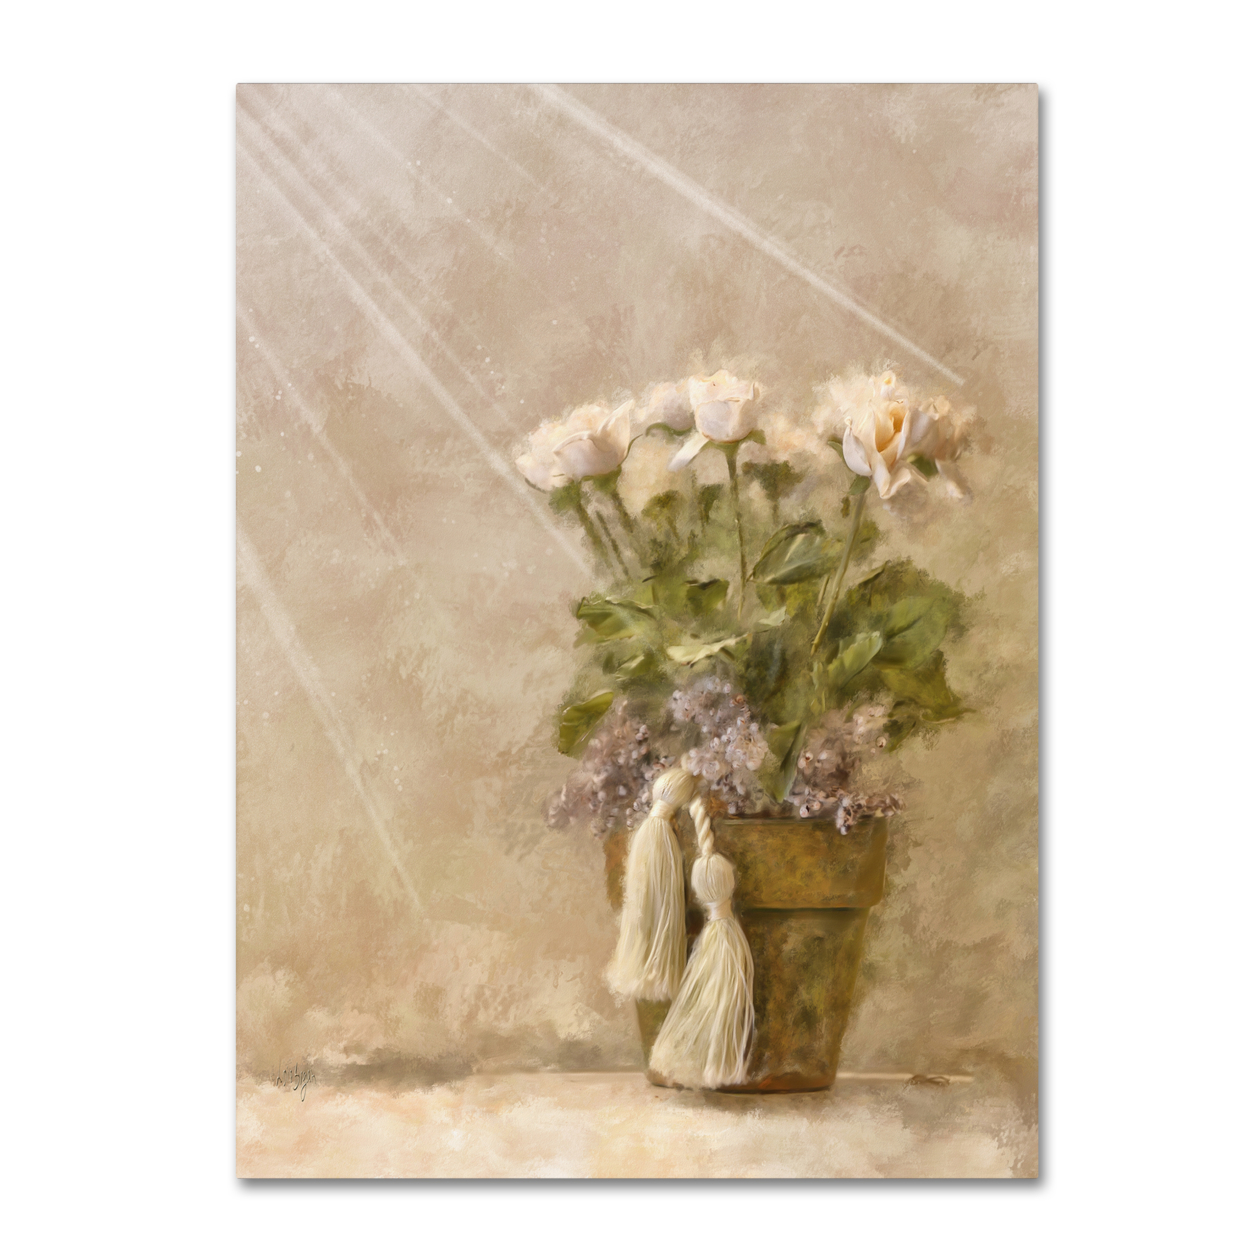 Lois Bryan 'White Roses In The Light' Canvas Wall Art 35 X 47 Inches